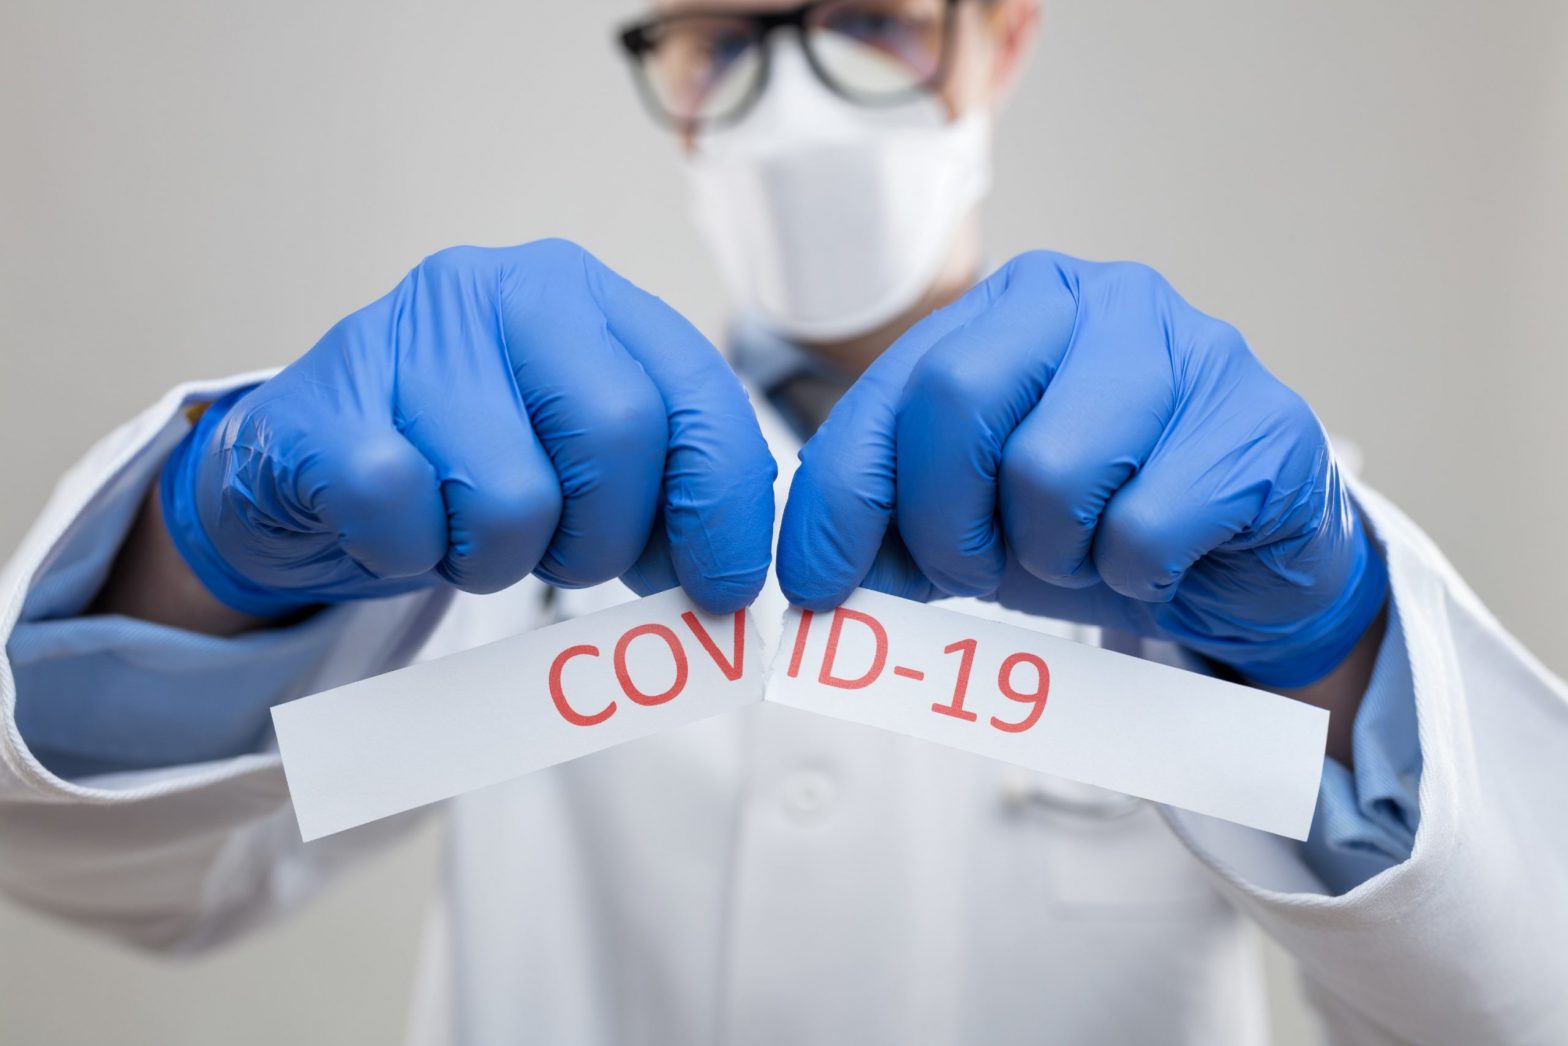 The End of the COVID-19 Pandemic: A New Chapter, or a Brief Respite?